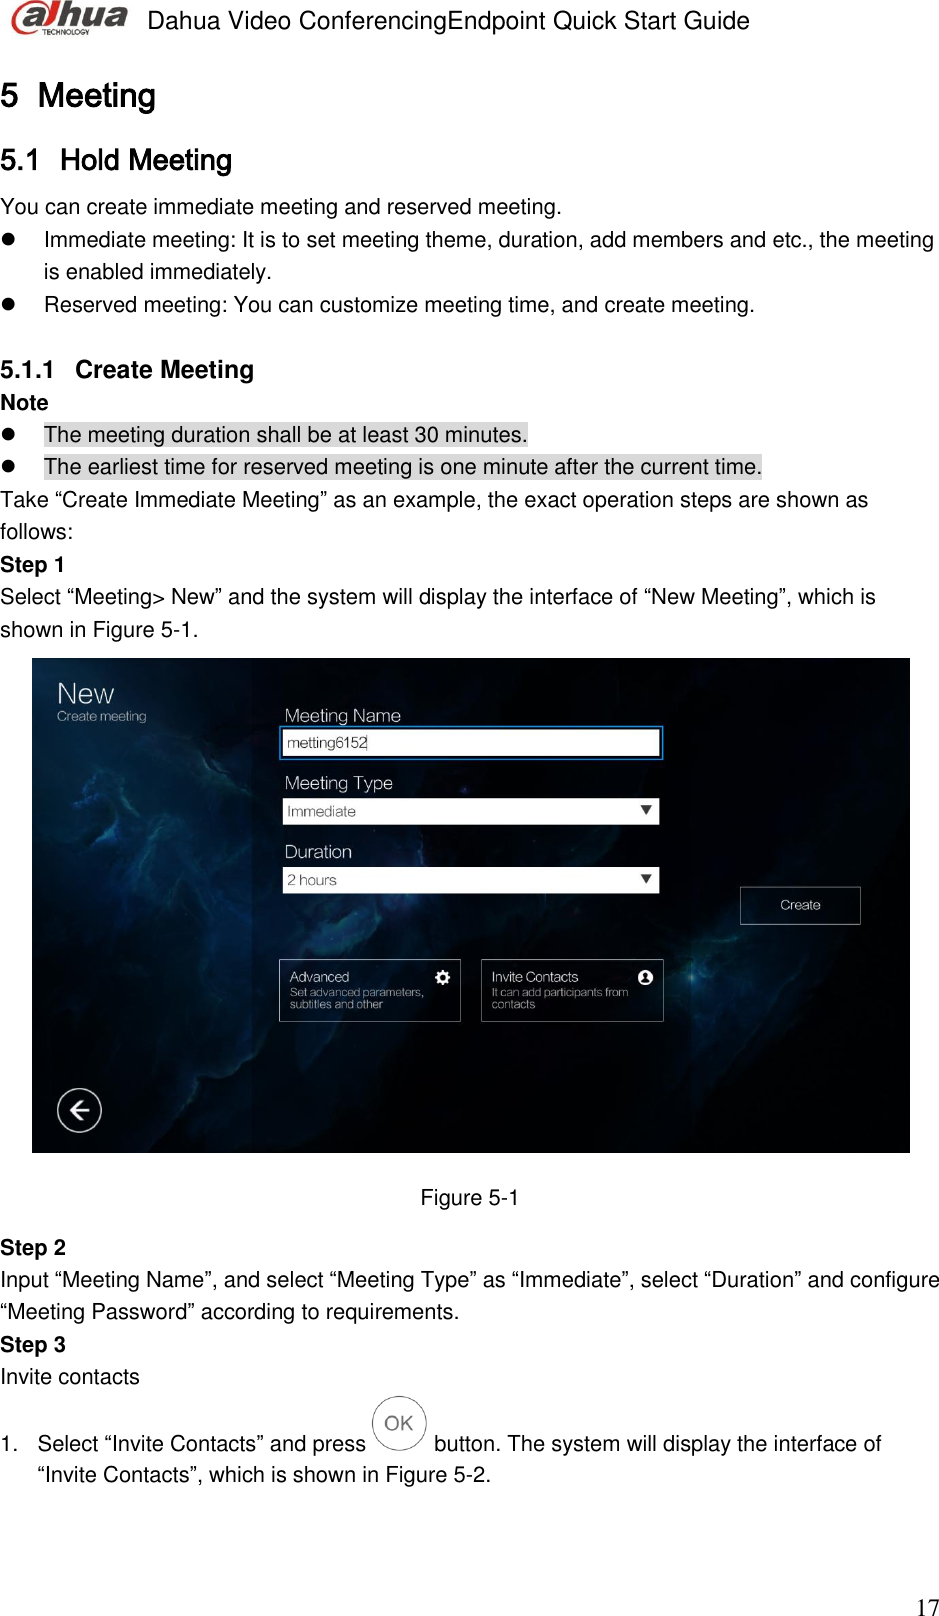 Page 26 of Zhejiang Dahua Vision Technology VCS-TS20A0 VIDEO CONFERENCING ENDPOINT User Manual